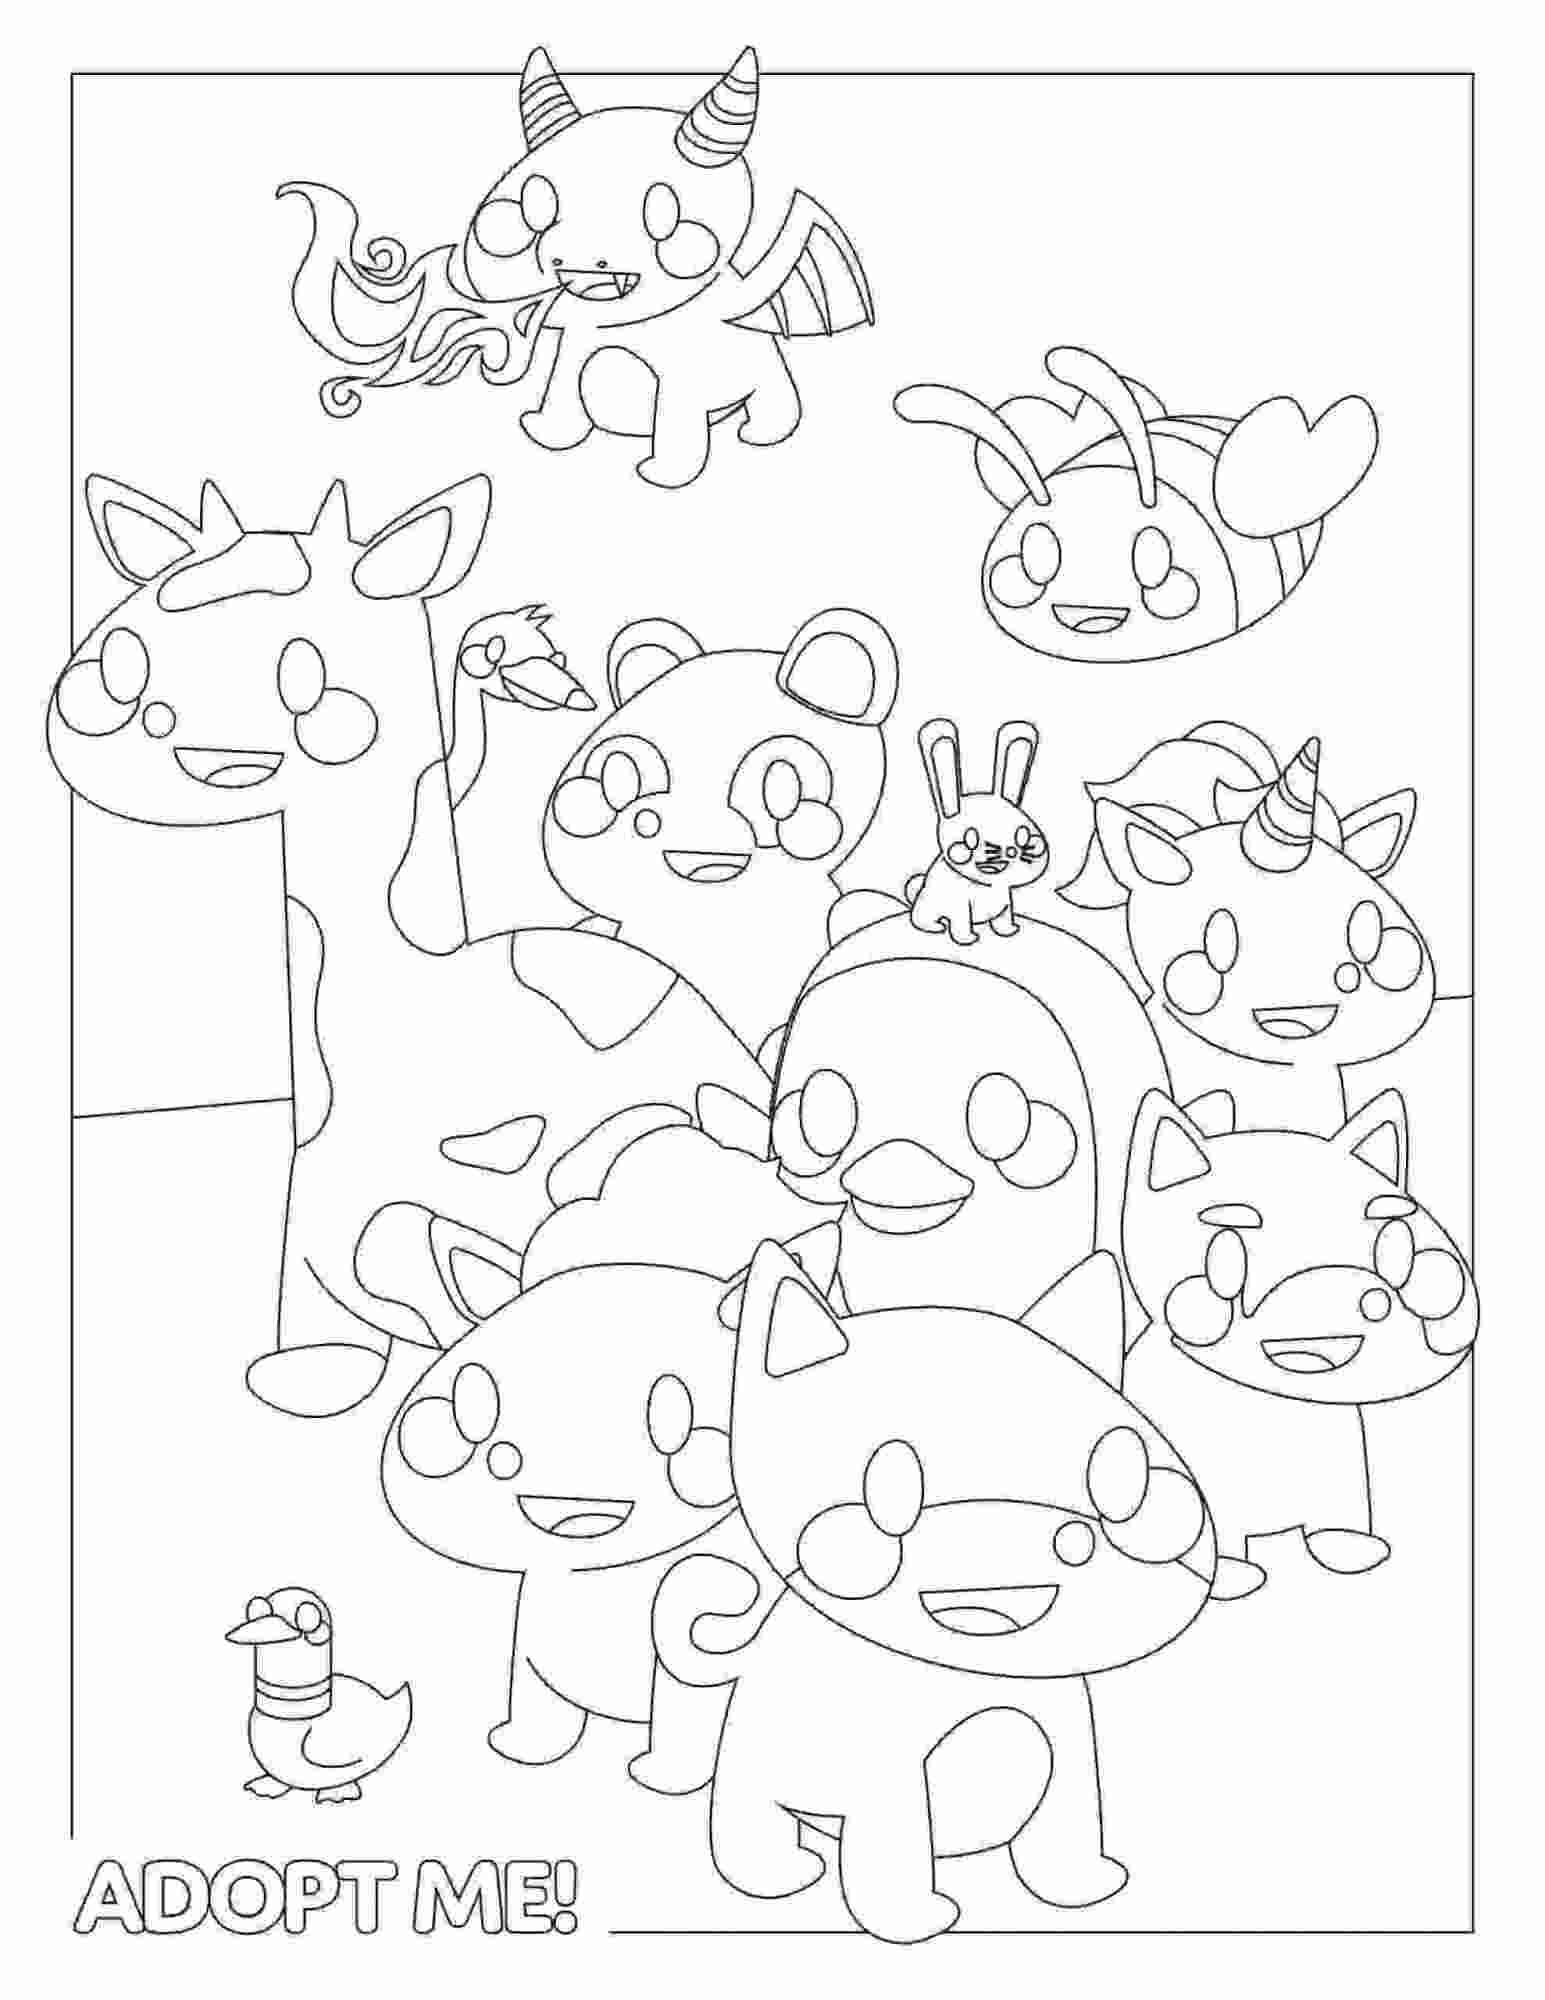 All animals from Adopt me video games Coloring Page - Free Printable ...